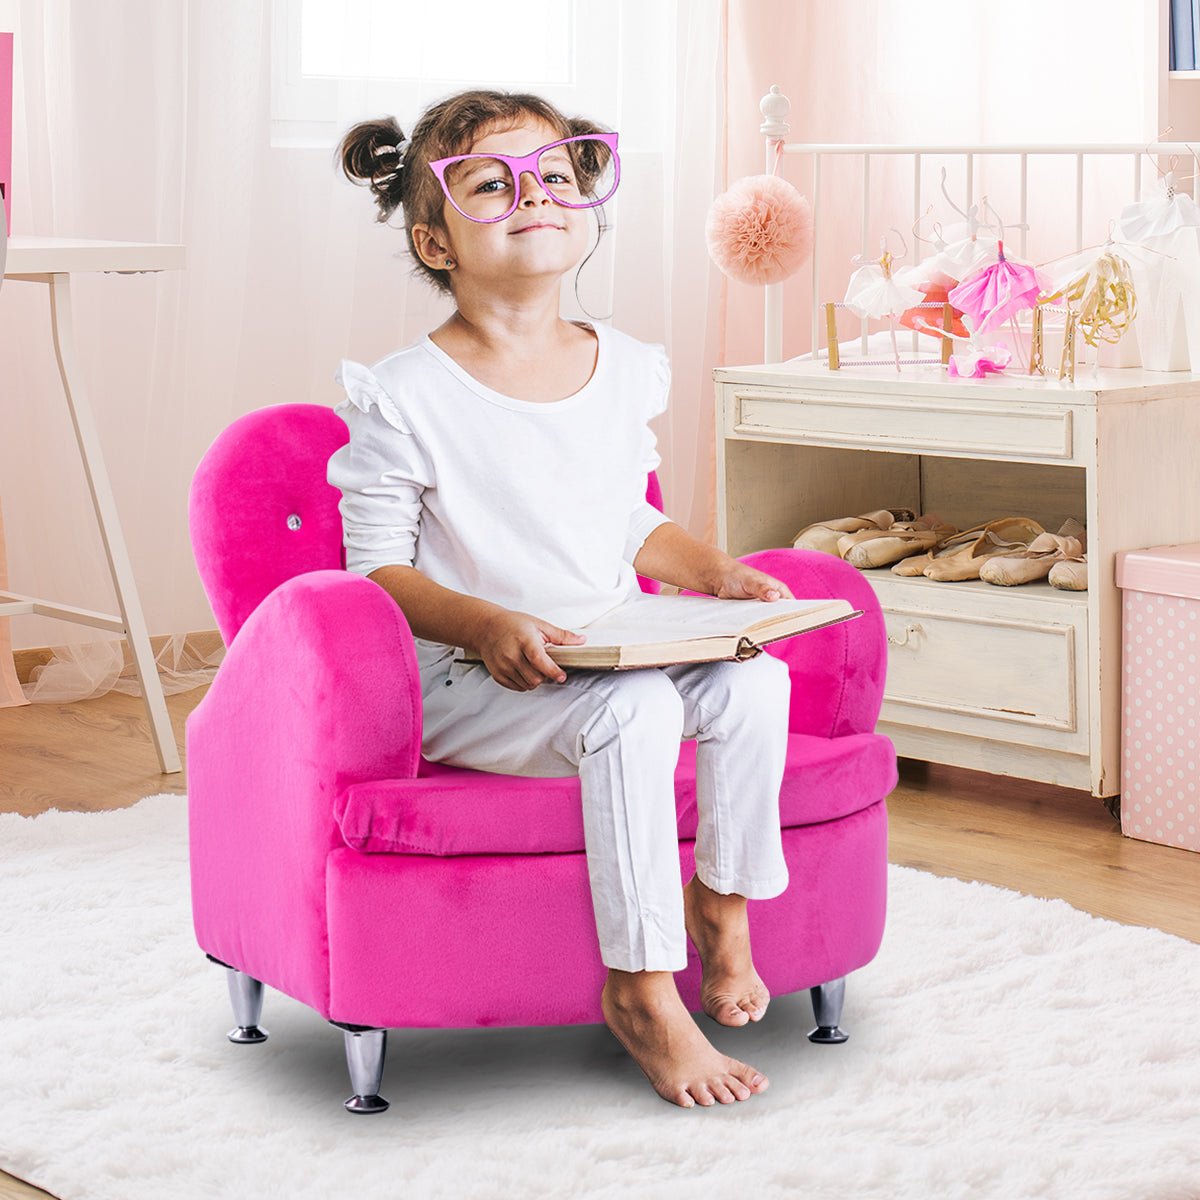 Toddler Sofa Armchair: Single Kids Seat with Non-slip Legs for Living